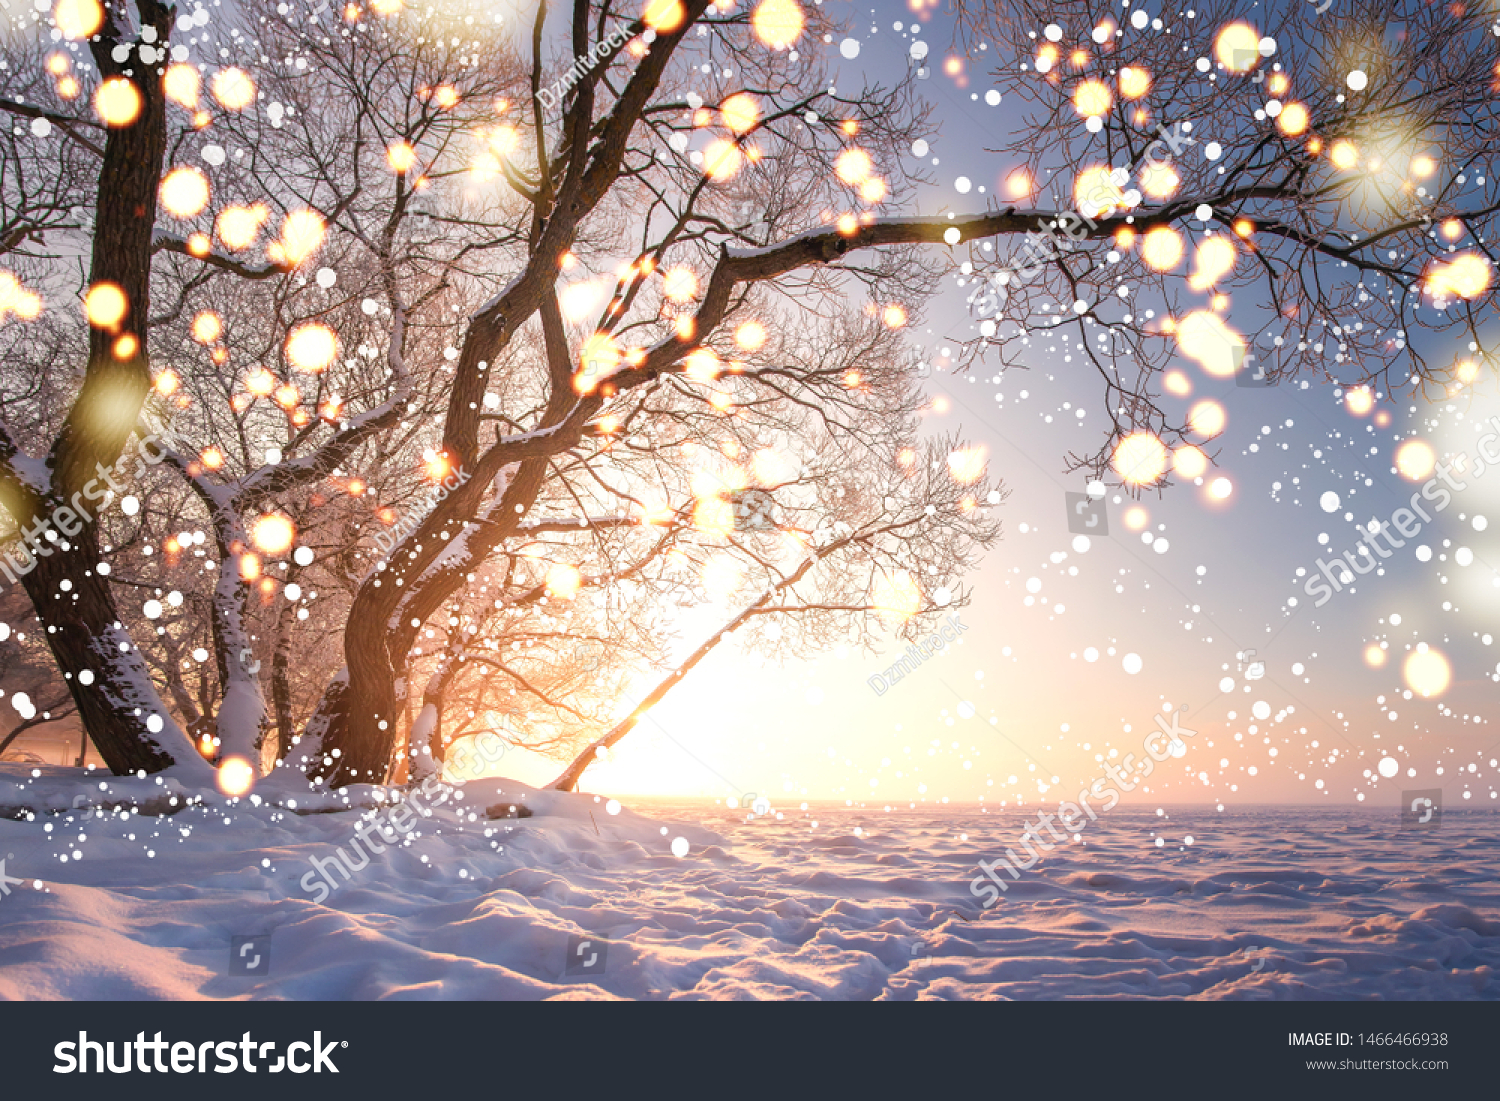 Christmas background. Magic glowing snowflakes in winter nature landscape. Beautiful winter scene with bokeh. Winter fairytale. Illuminated lights shine tree #1466466938